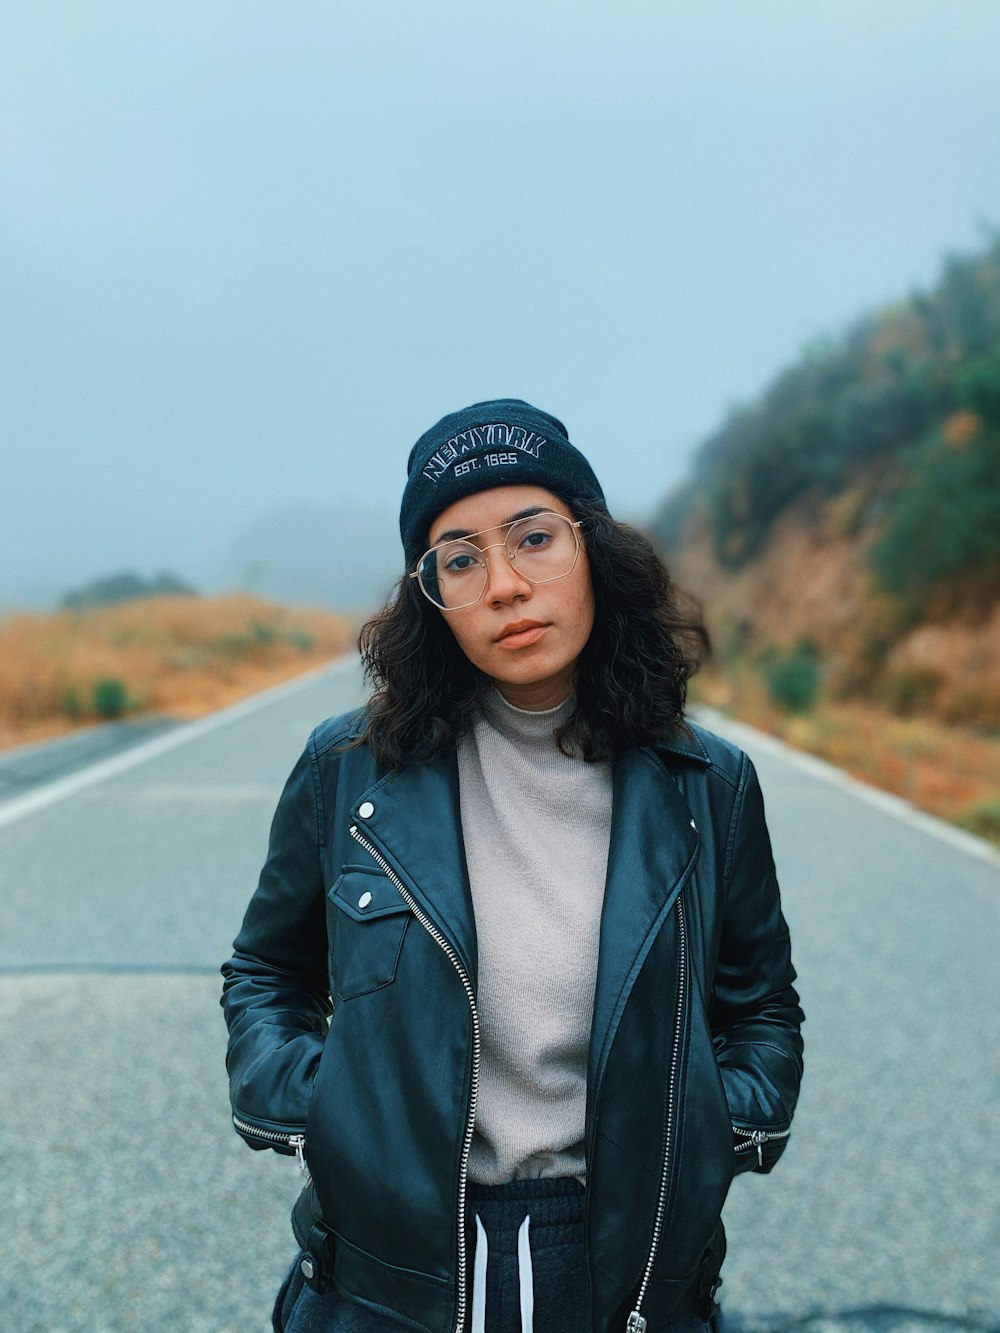 woman wearing black leather zip-up jacket and knit cap